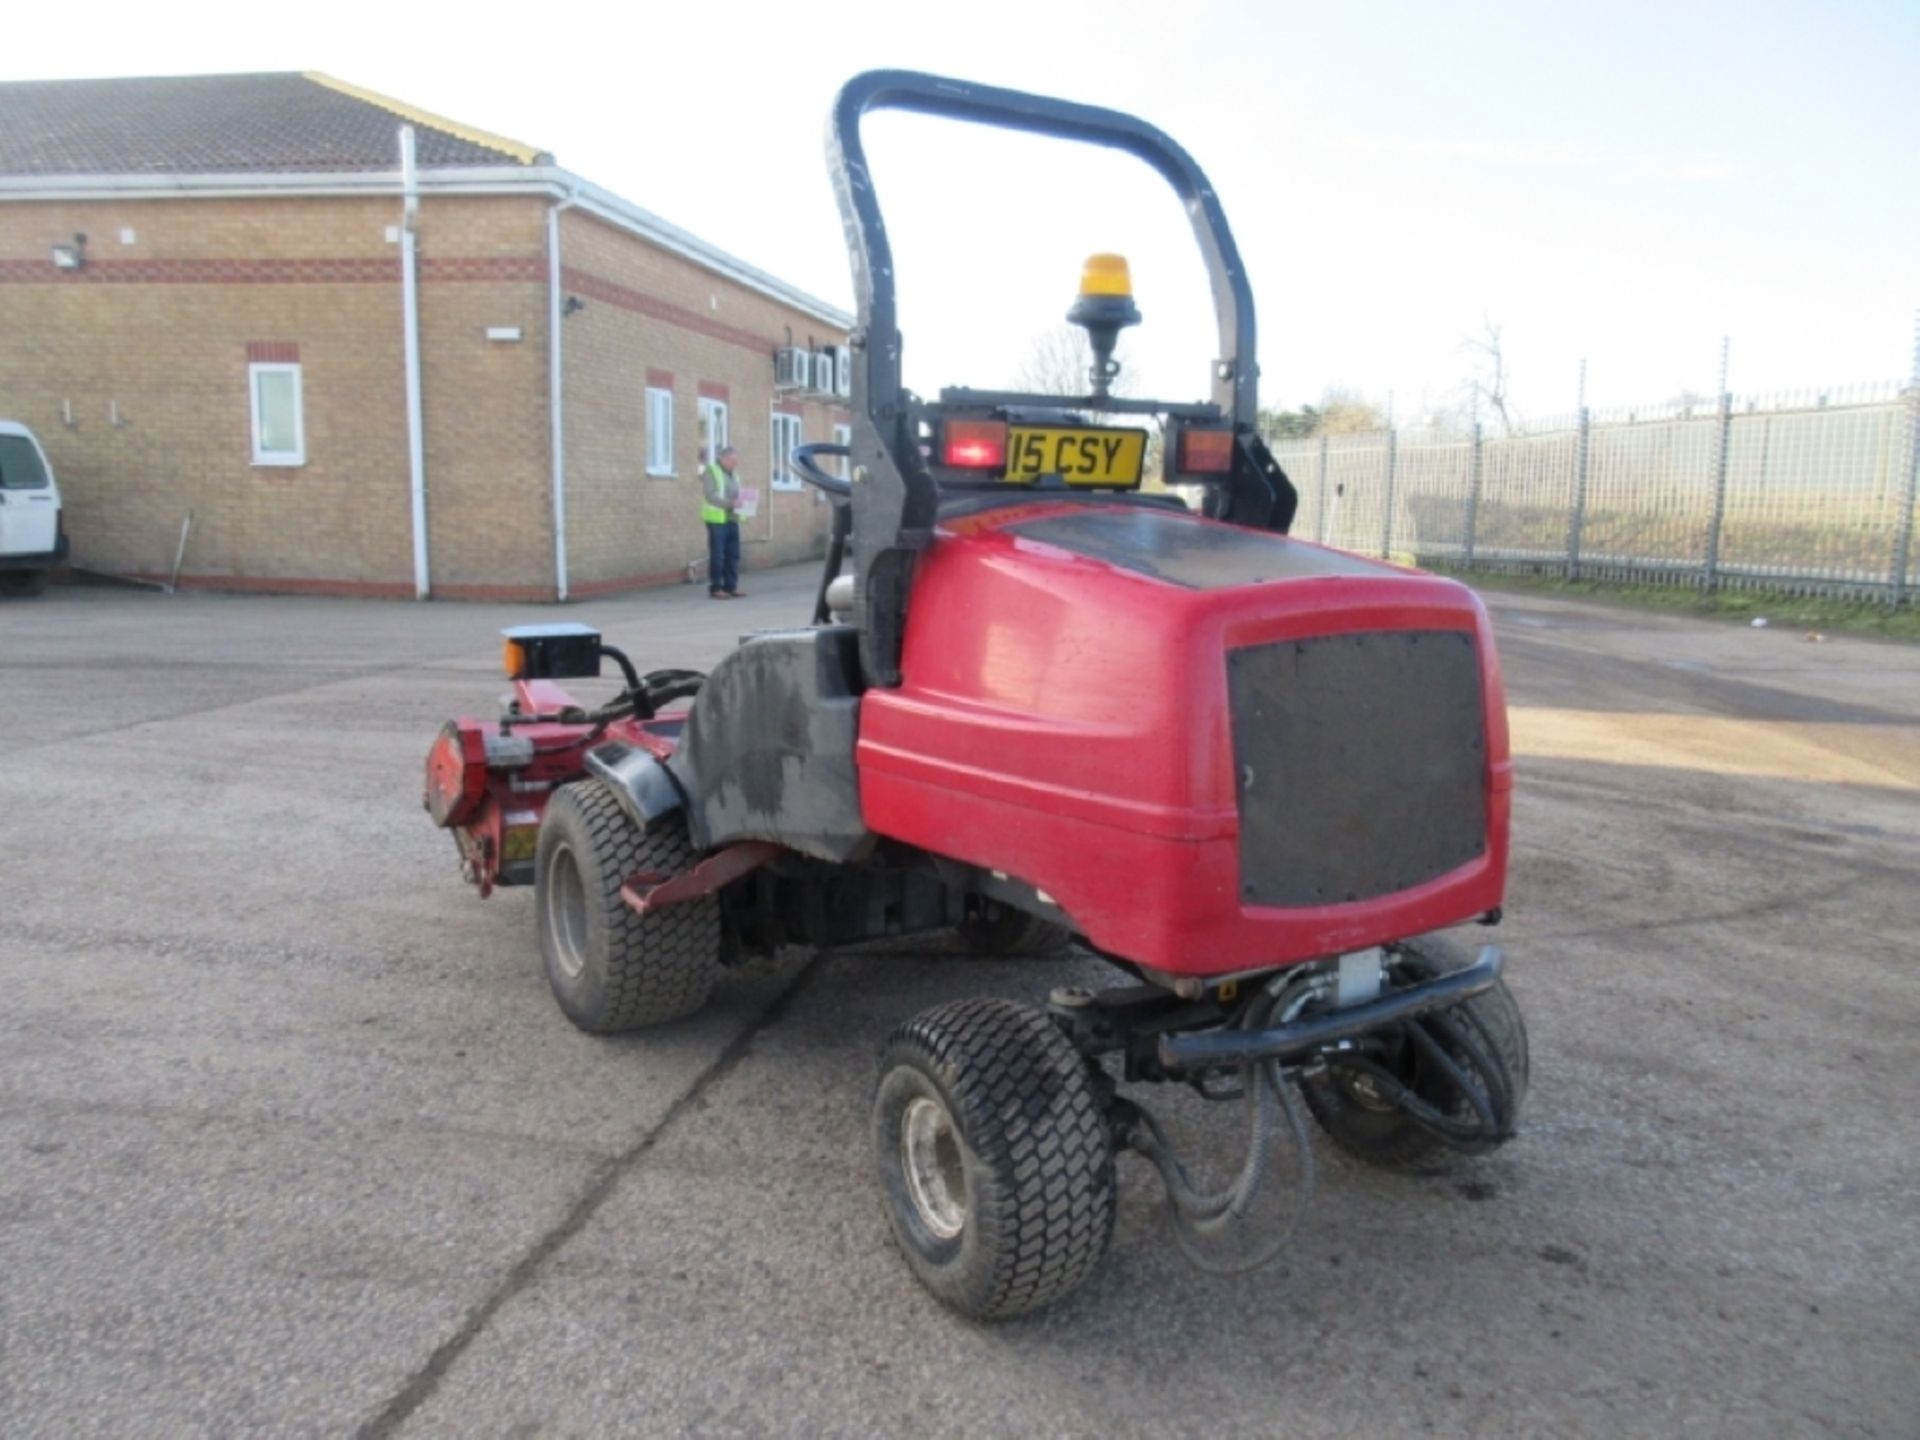 TORO GM3400 - 1498cc Plant Diesel Automatic - VIN: 30651314000111 - Year: 2015 - 2,123 Hours - - Image 4 of 8